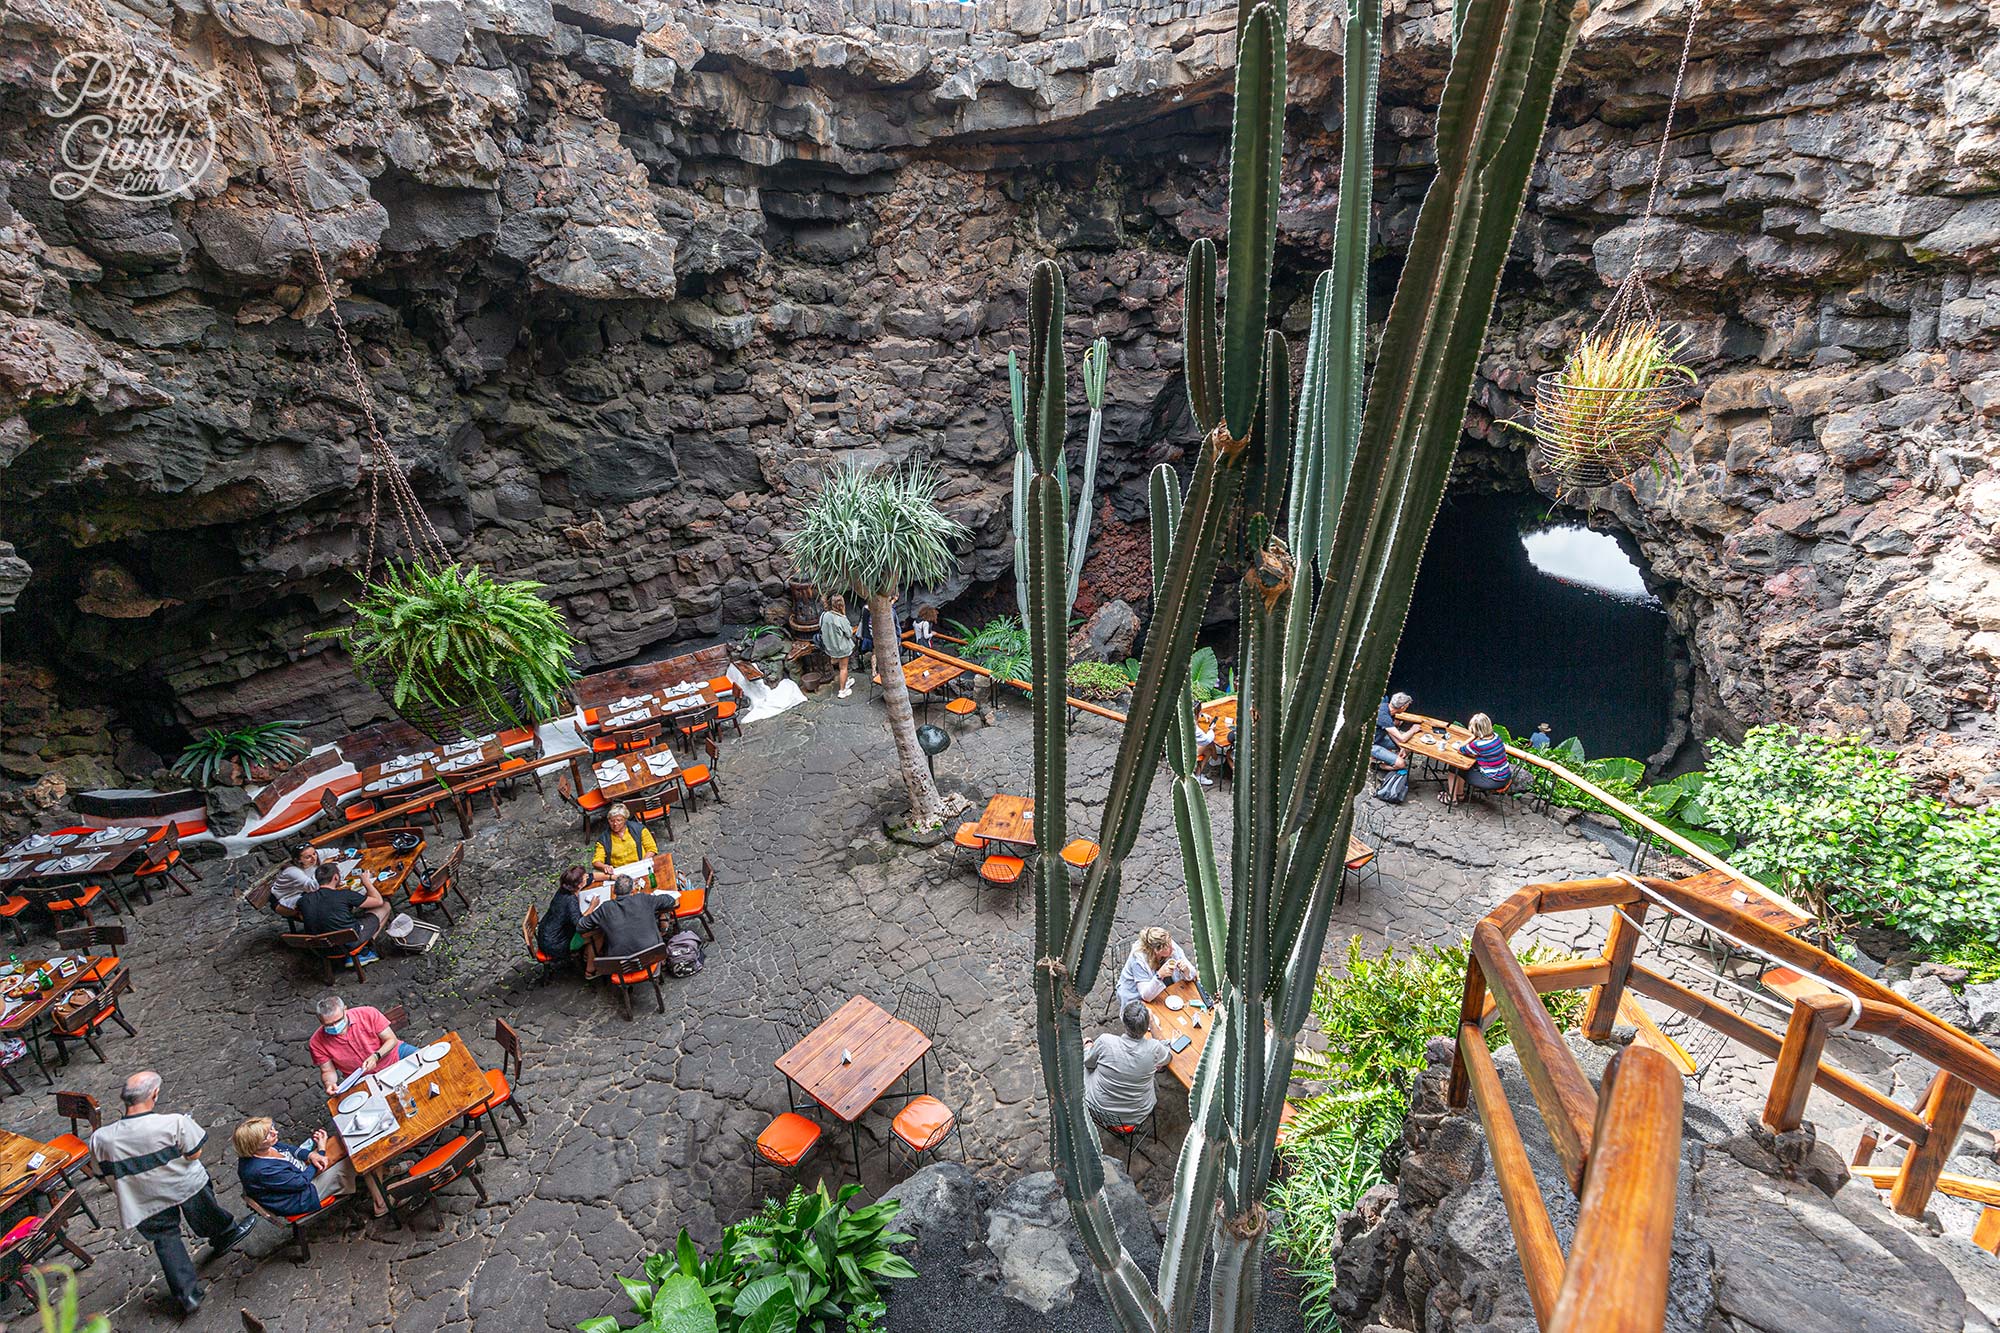 The most fabulous location for lunch at the cave restaurant